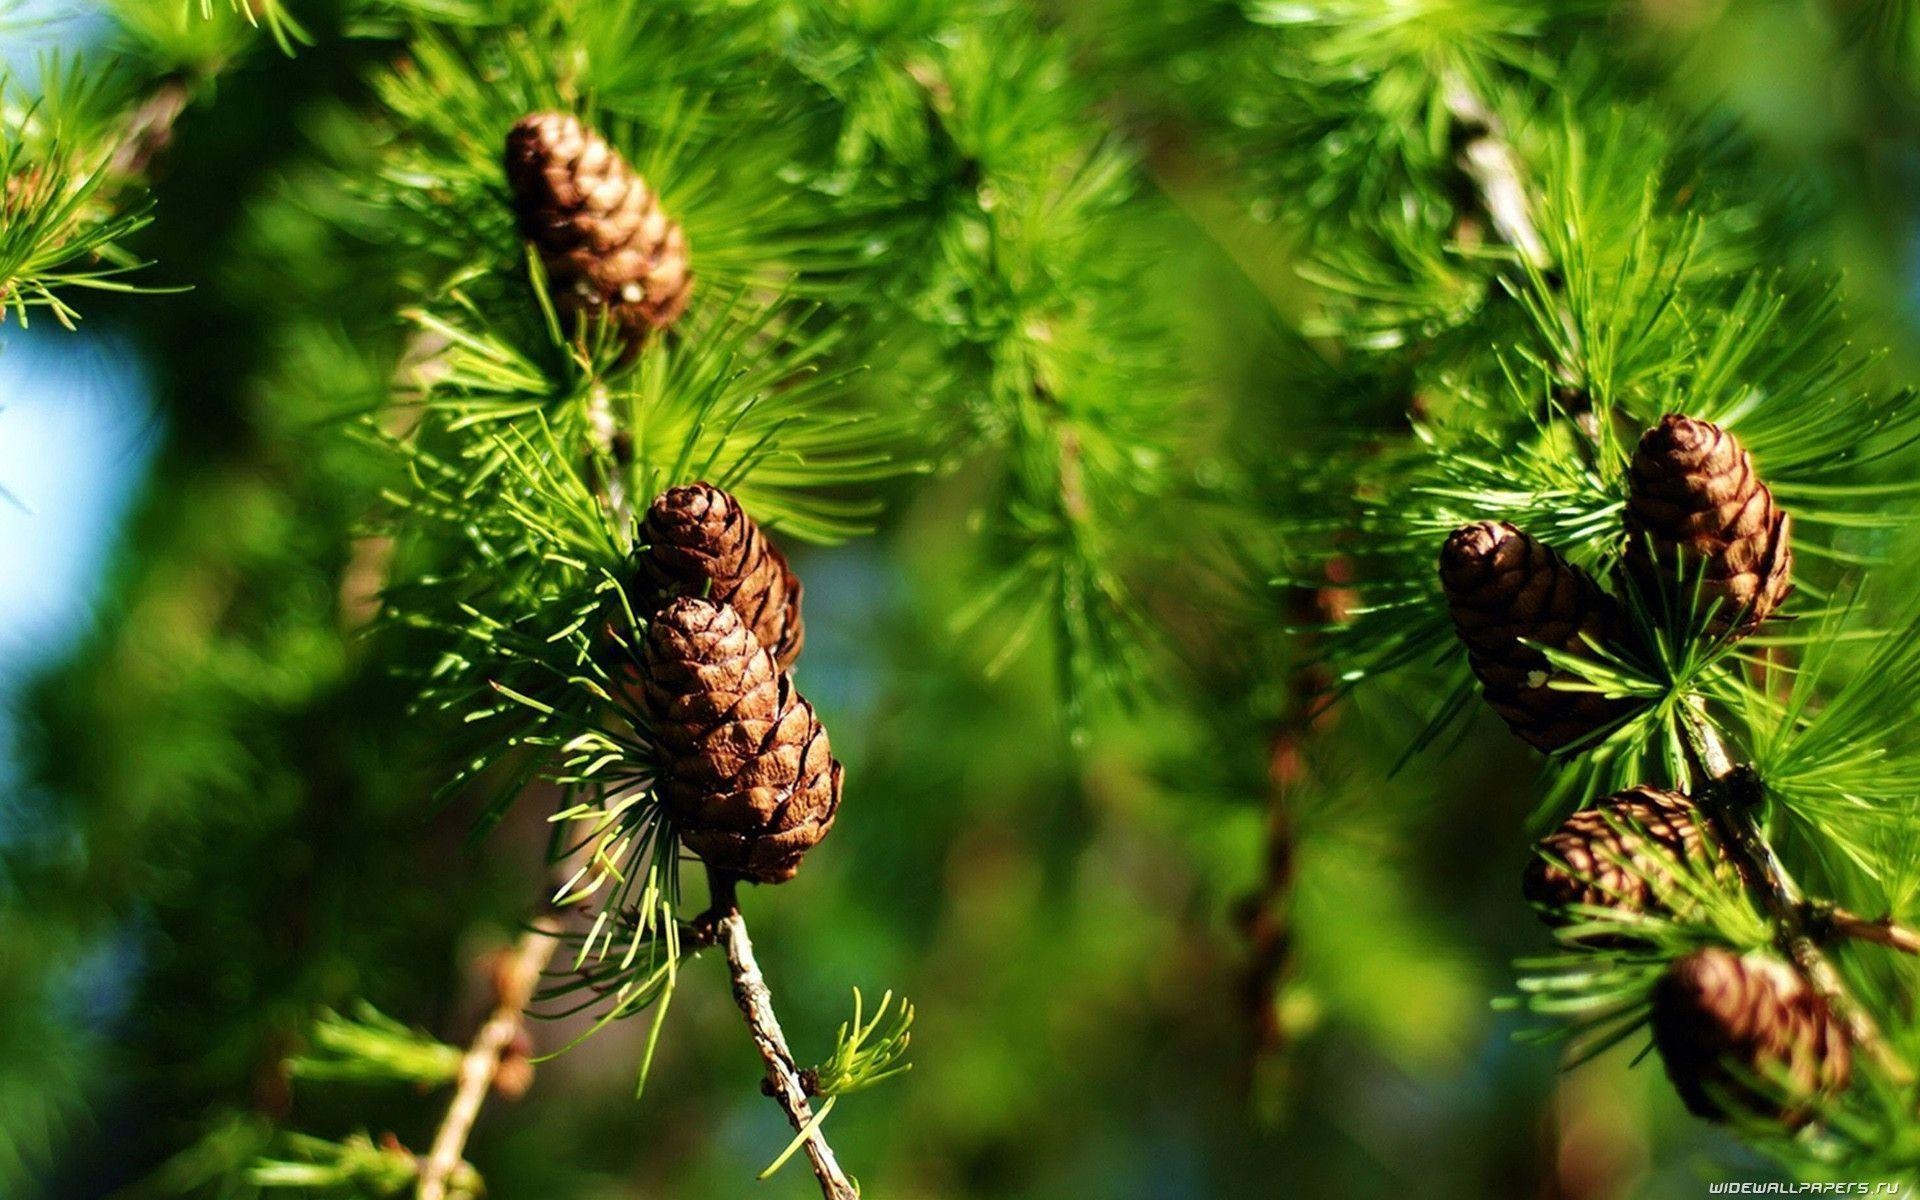 Pine tree wallpapers, Diverse tree images, Nature's tapestry, Woodland beauty, 1920x1200 HD Desktop